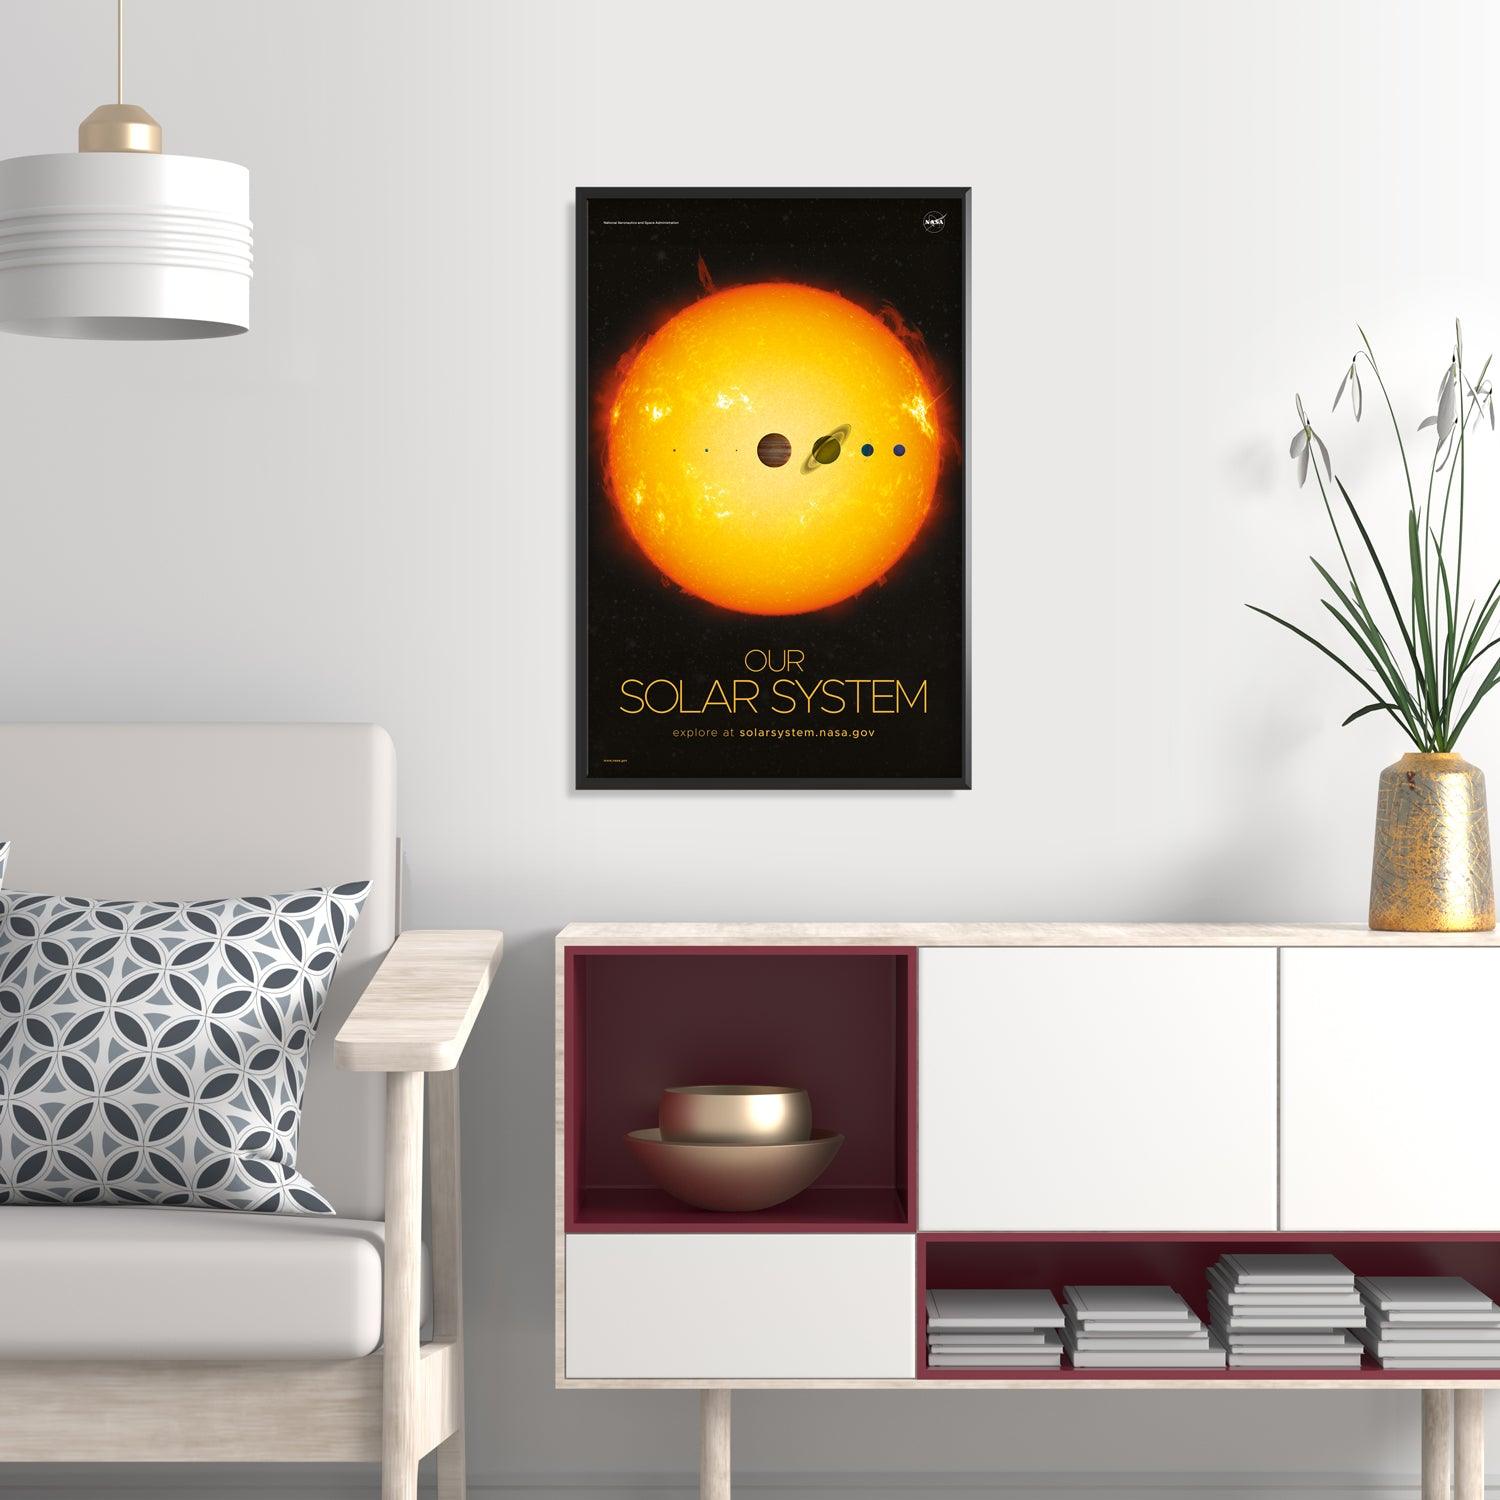 NASA Solar System Poster - Poster - Science Museum Shop